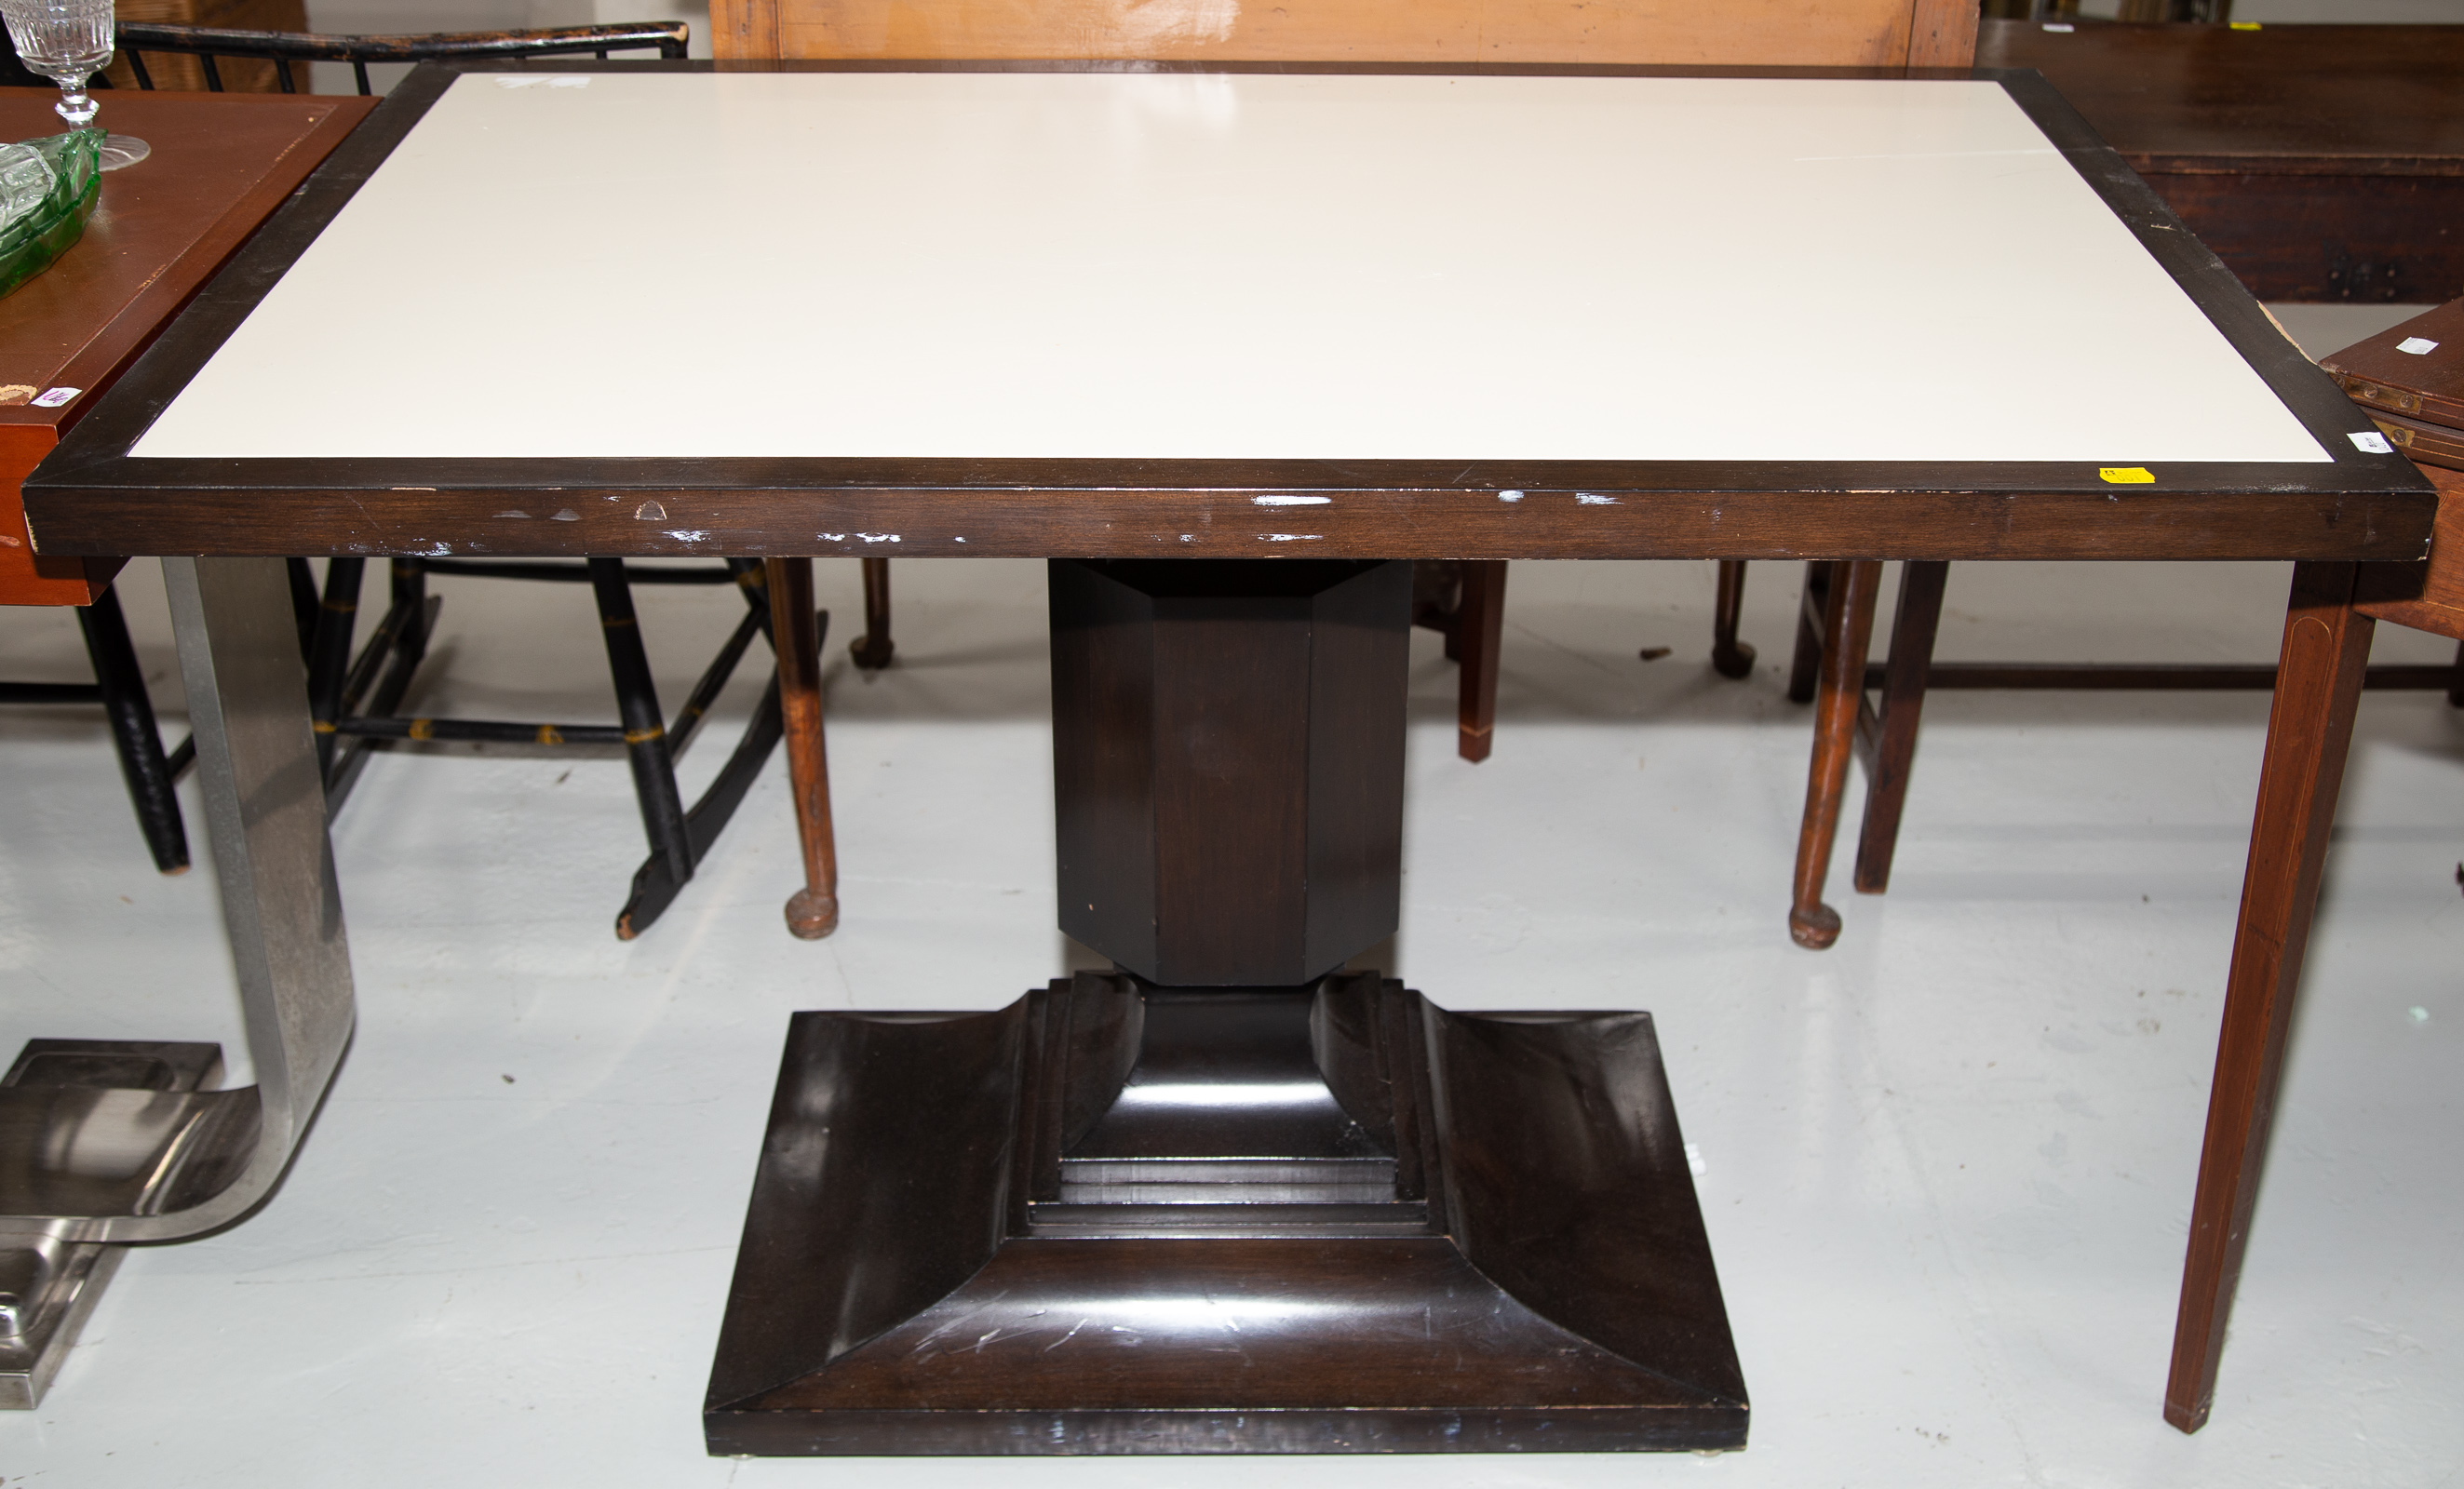 ART DECO STYLE PEDESTAL TABLE Late